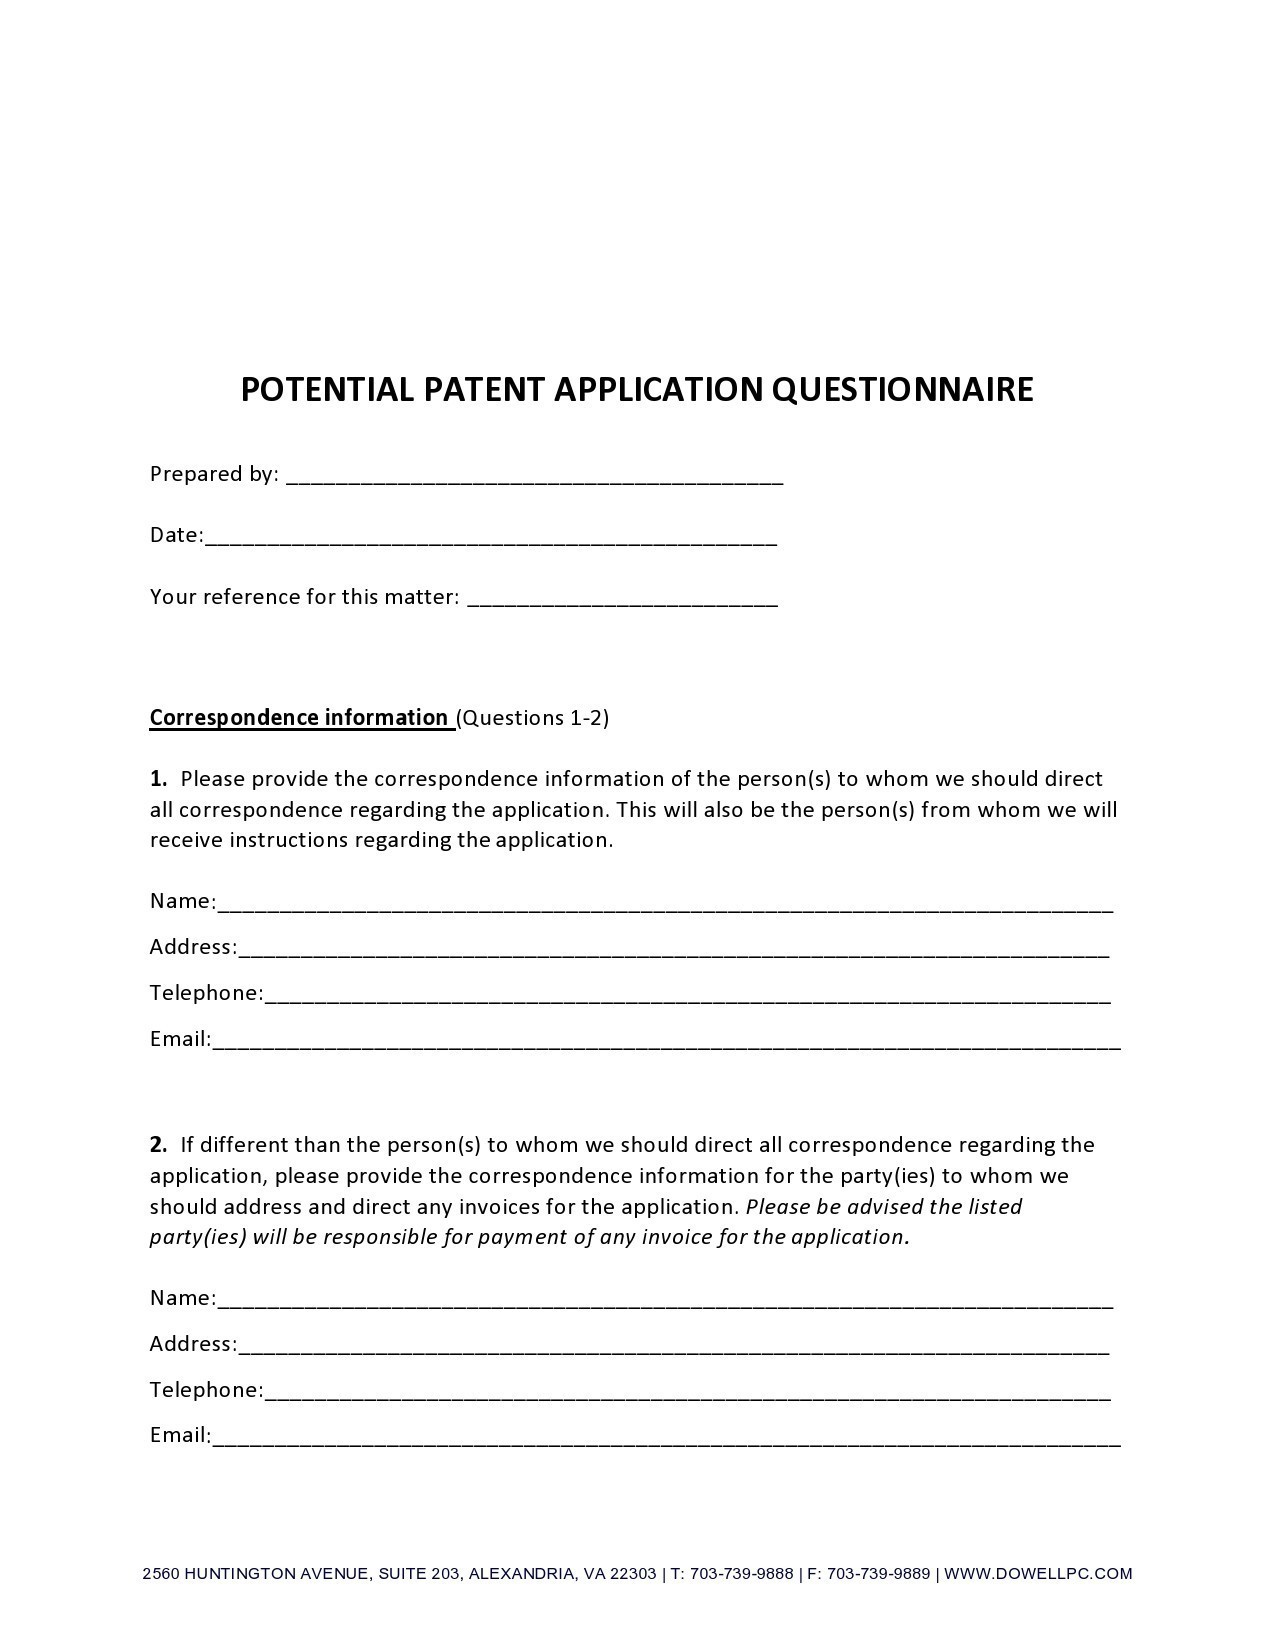 Free provisional patent application template 21